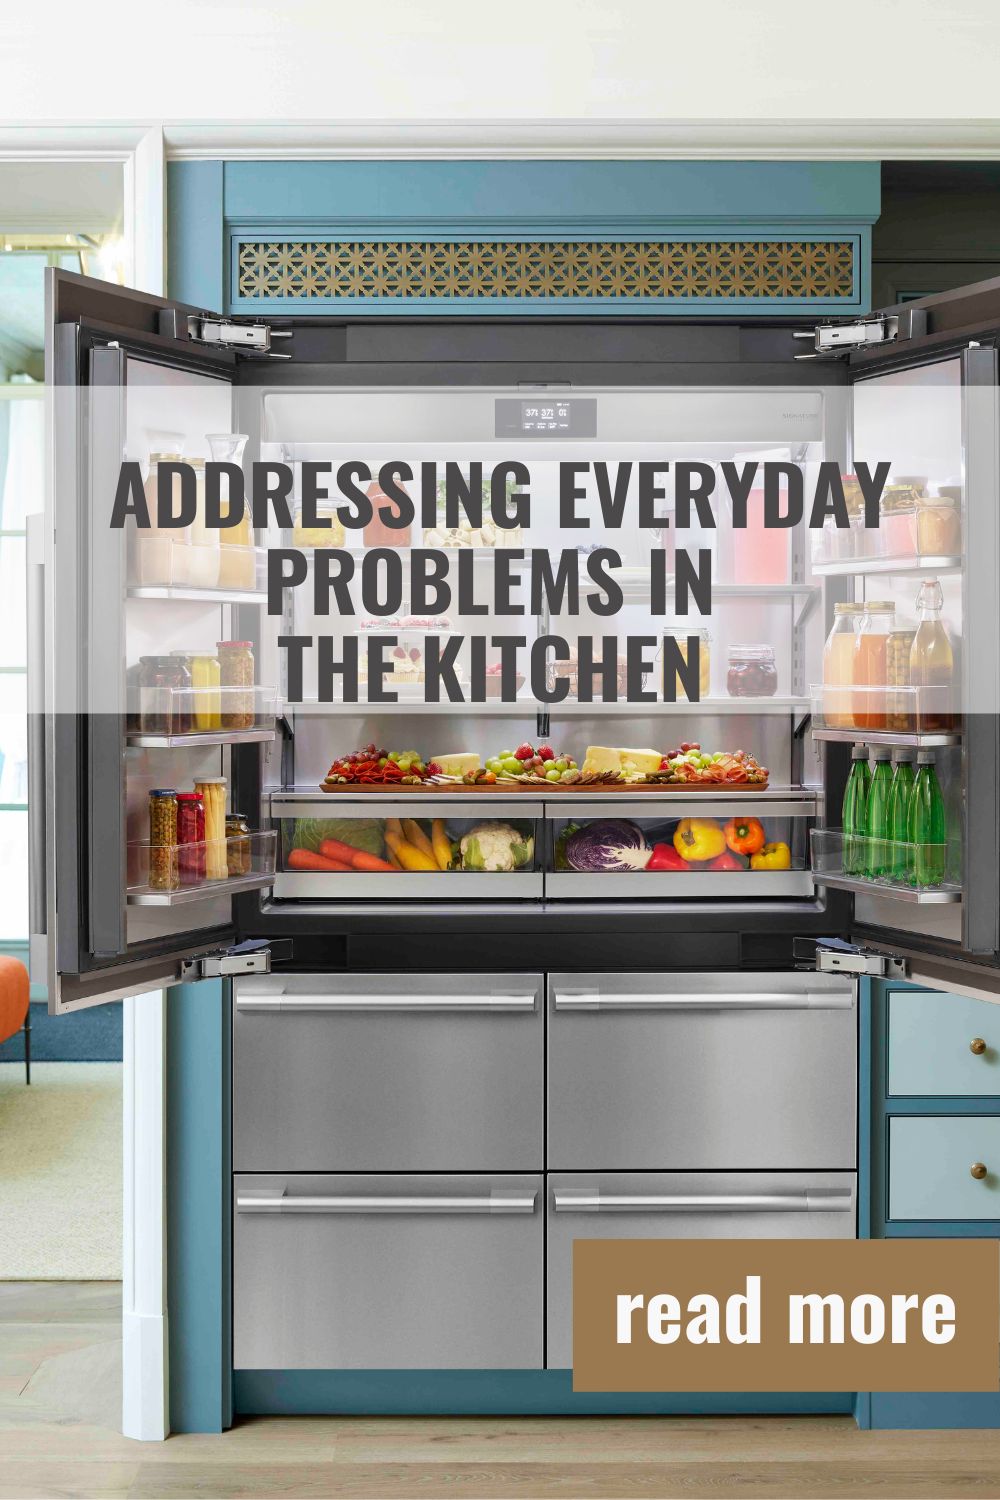 Addressing Everyday Problems in the Kitchen